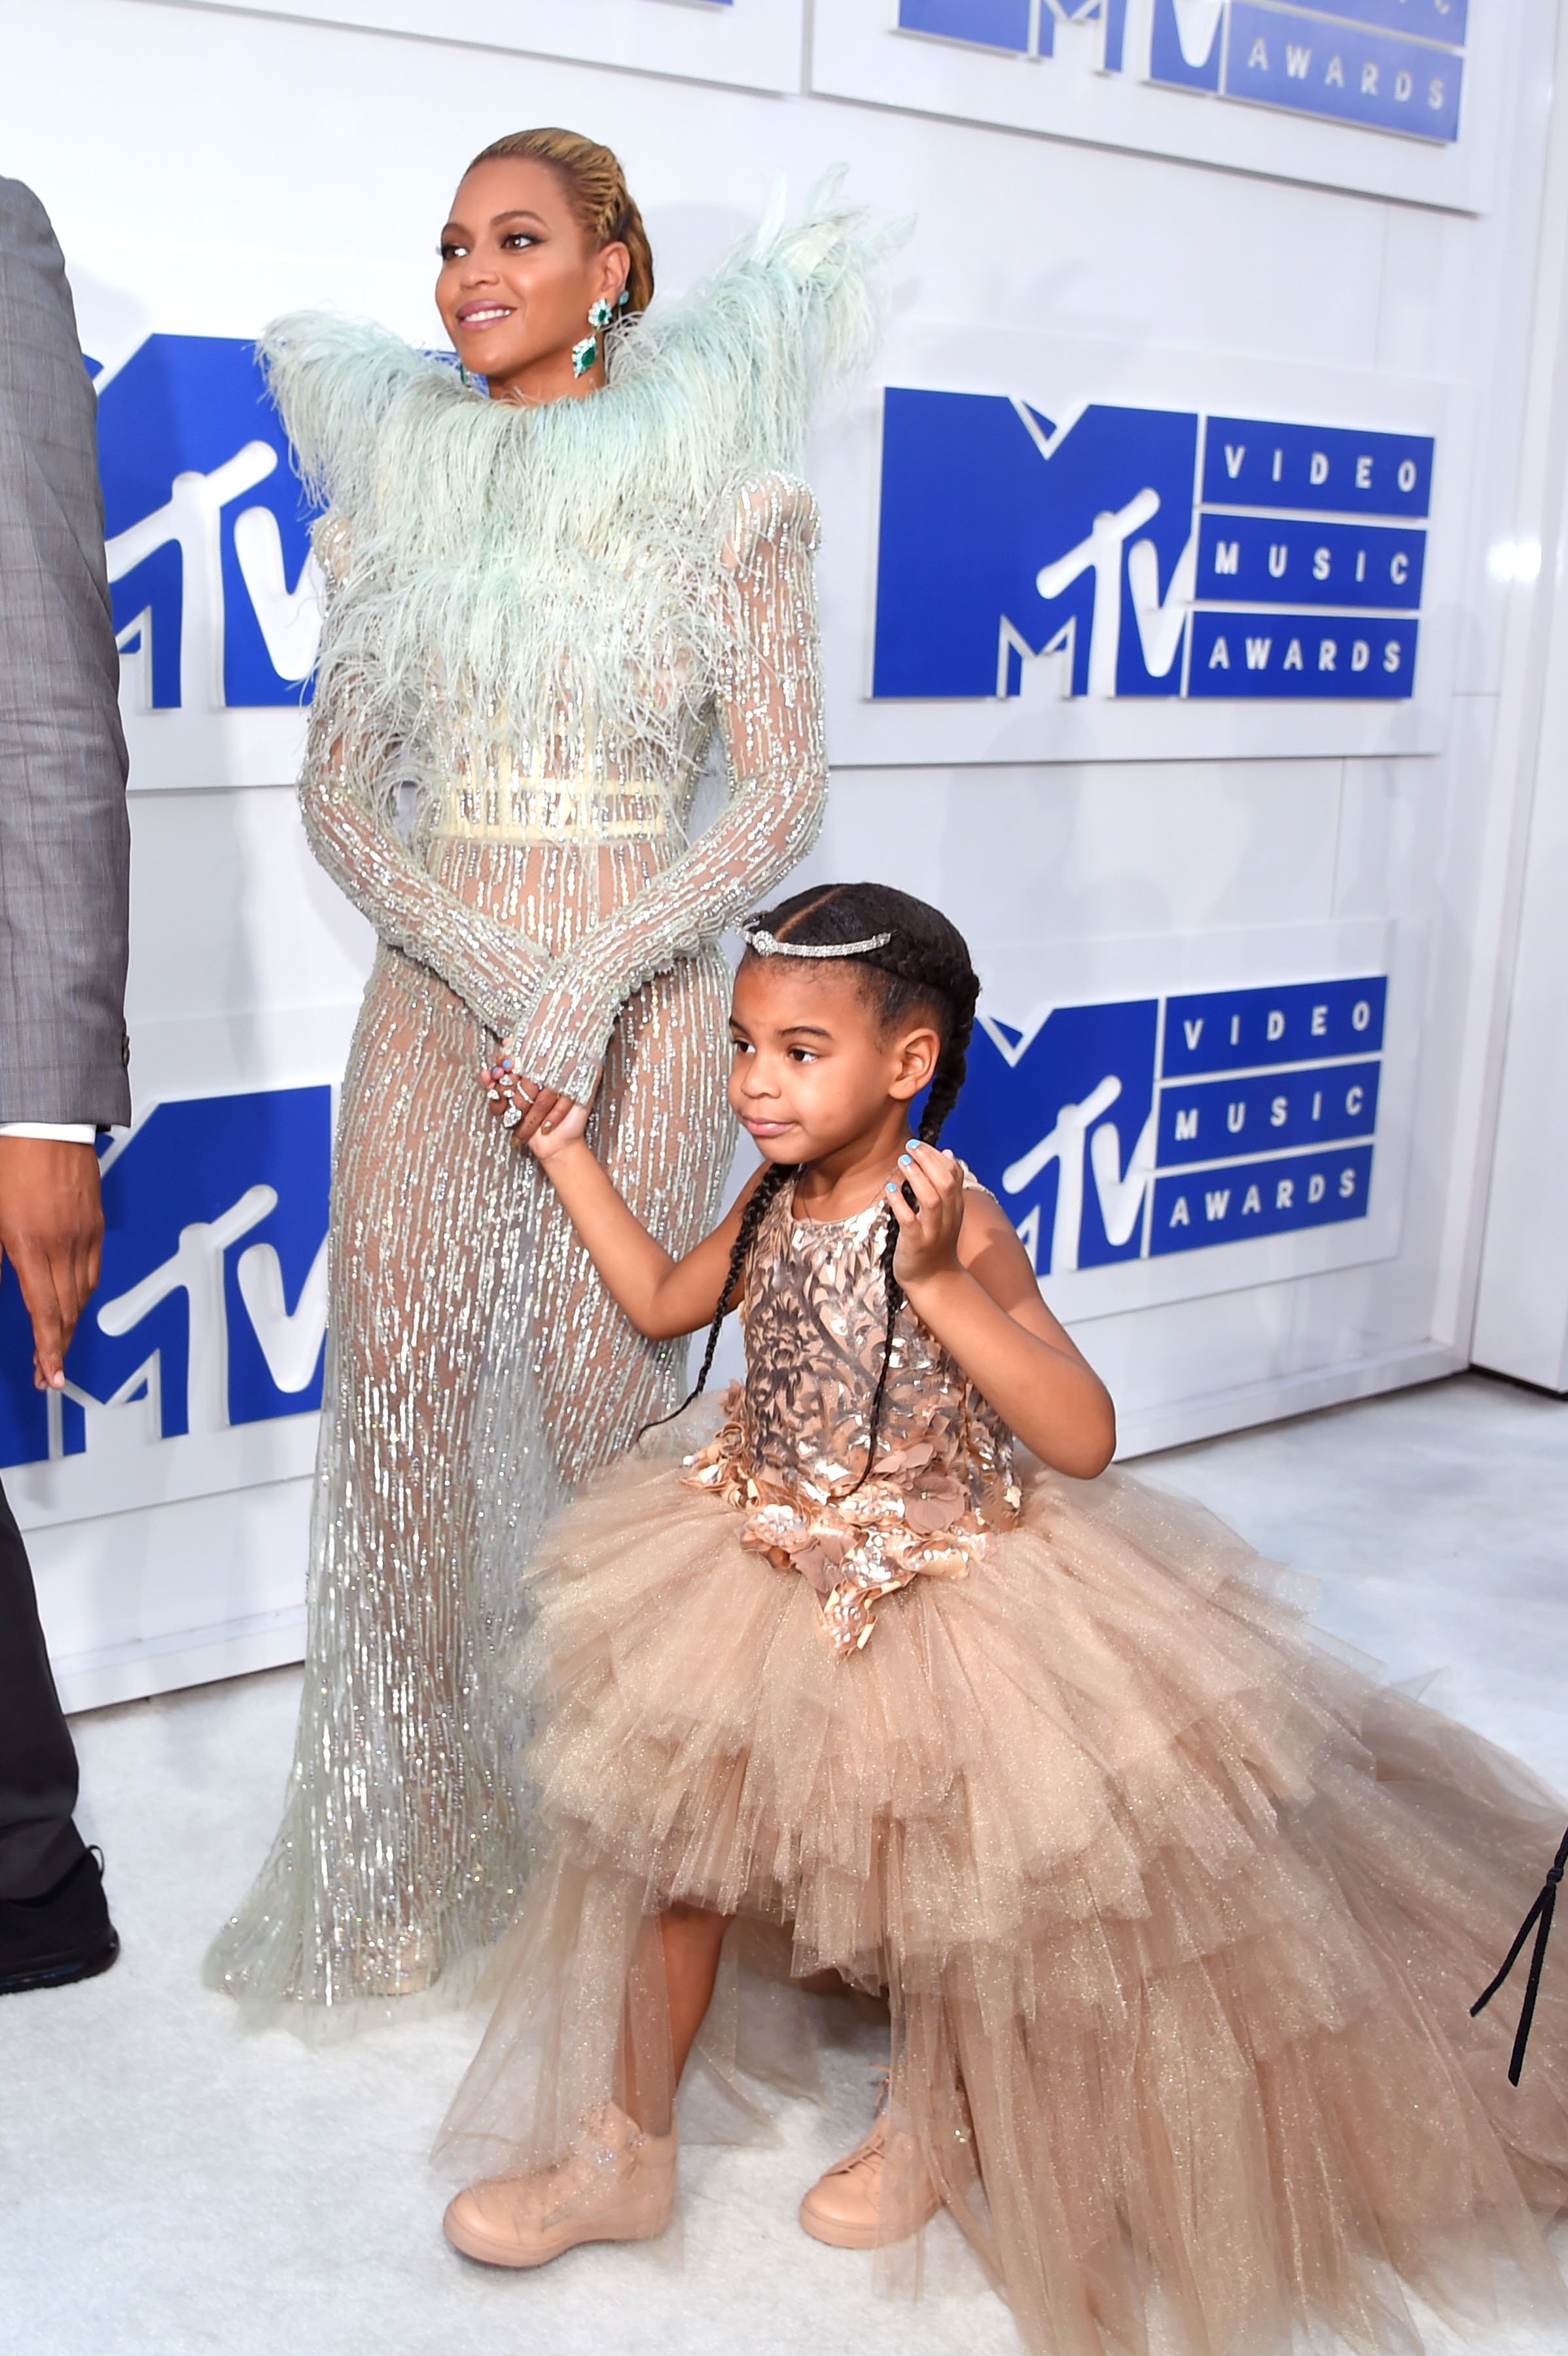 Beyoncé and Blue Ivy at the 2016 MTV Video Music Awards on August 28, 2016 in New York City. | Source: Getty Images